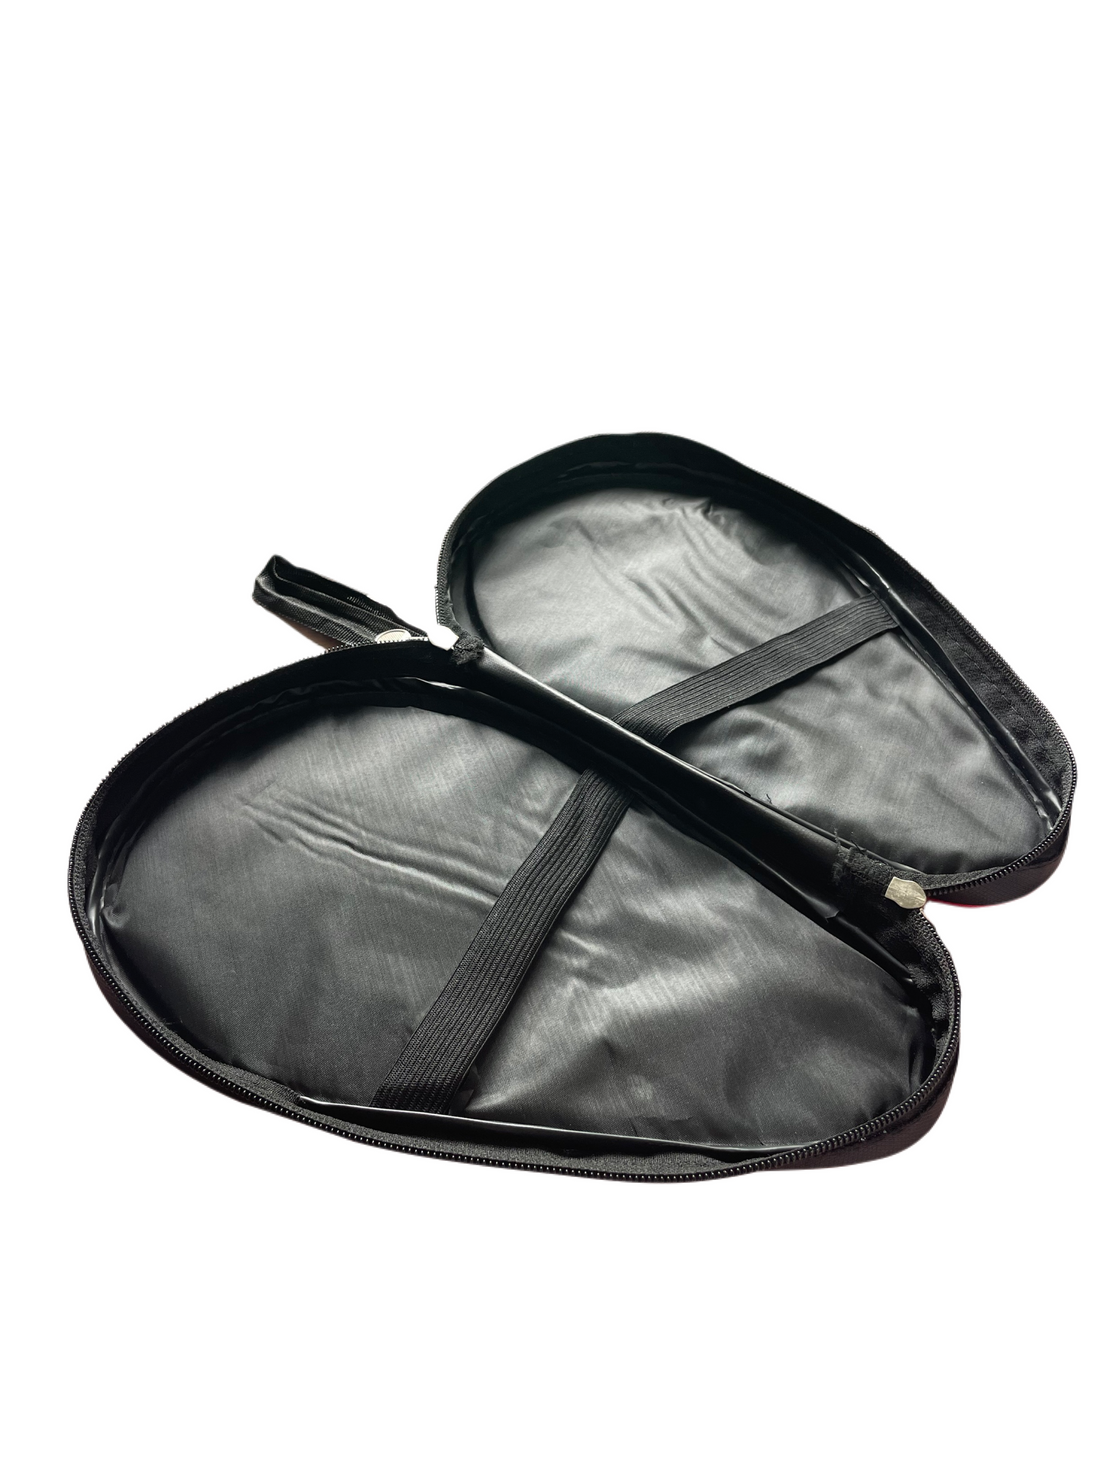 Table tennis racket bag for 2 rackets and extra table tennis balls (6 pieces)